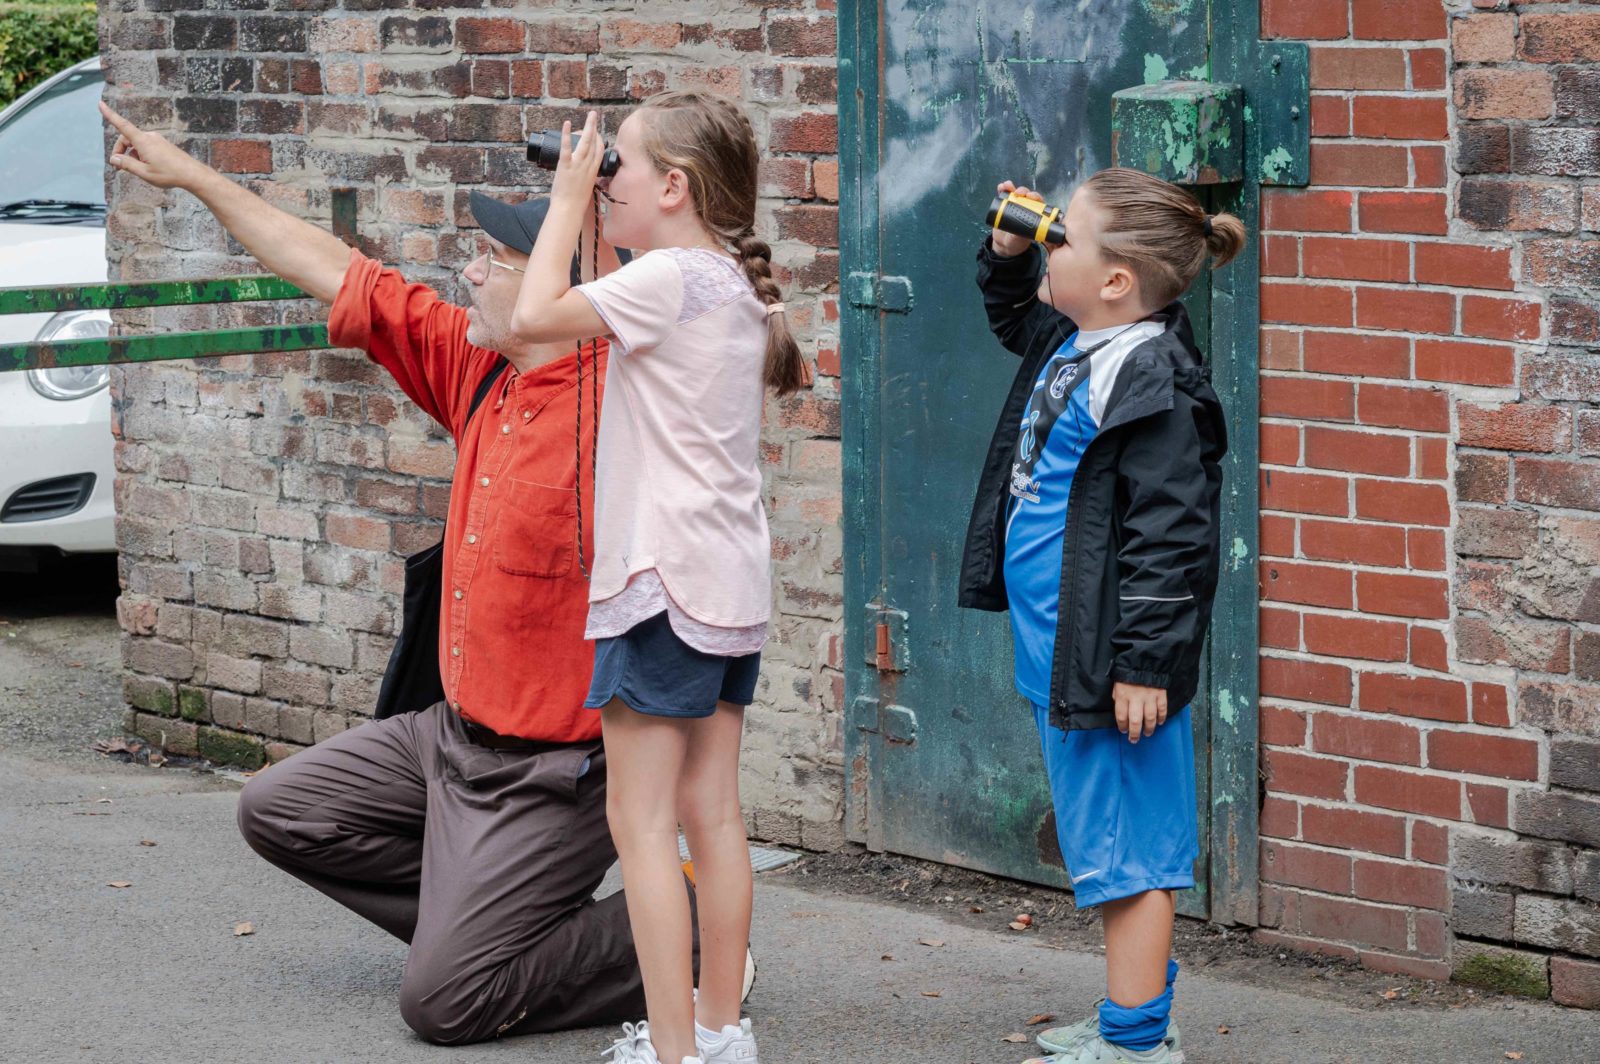 Paul kneels down and points to something in the sky whilst two children next to him look in the same direction with binoculars.